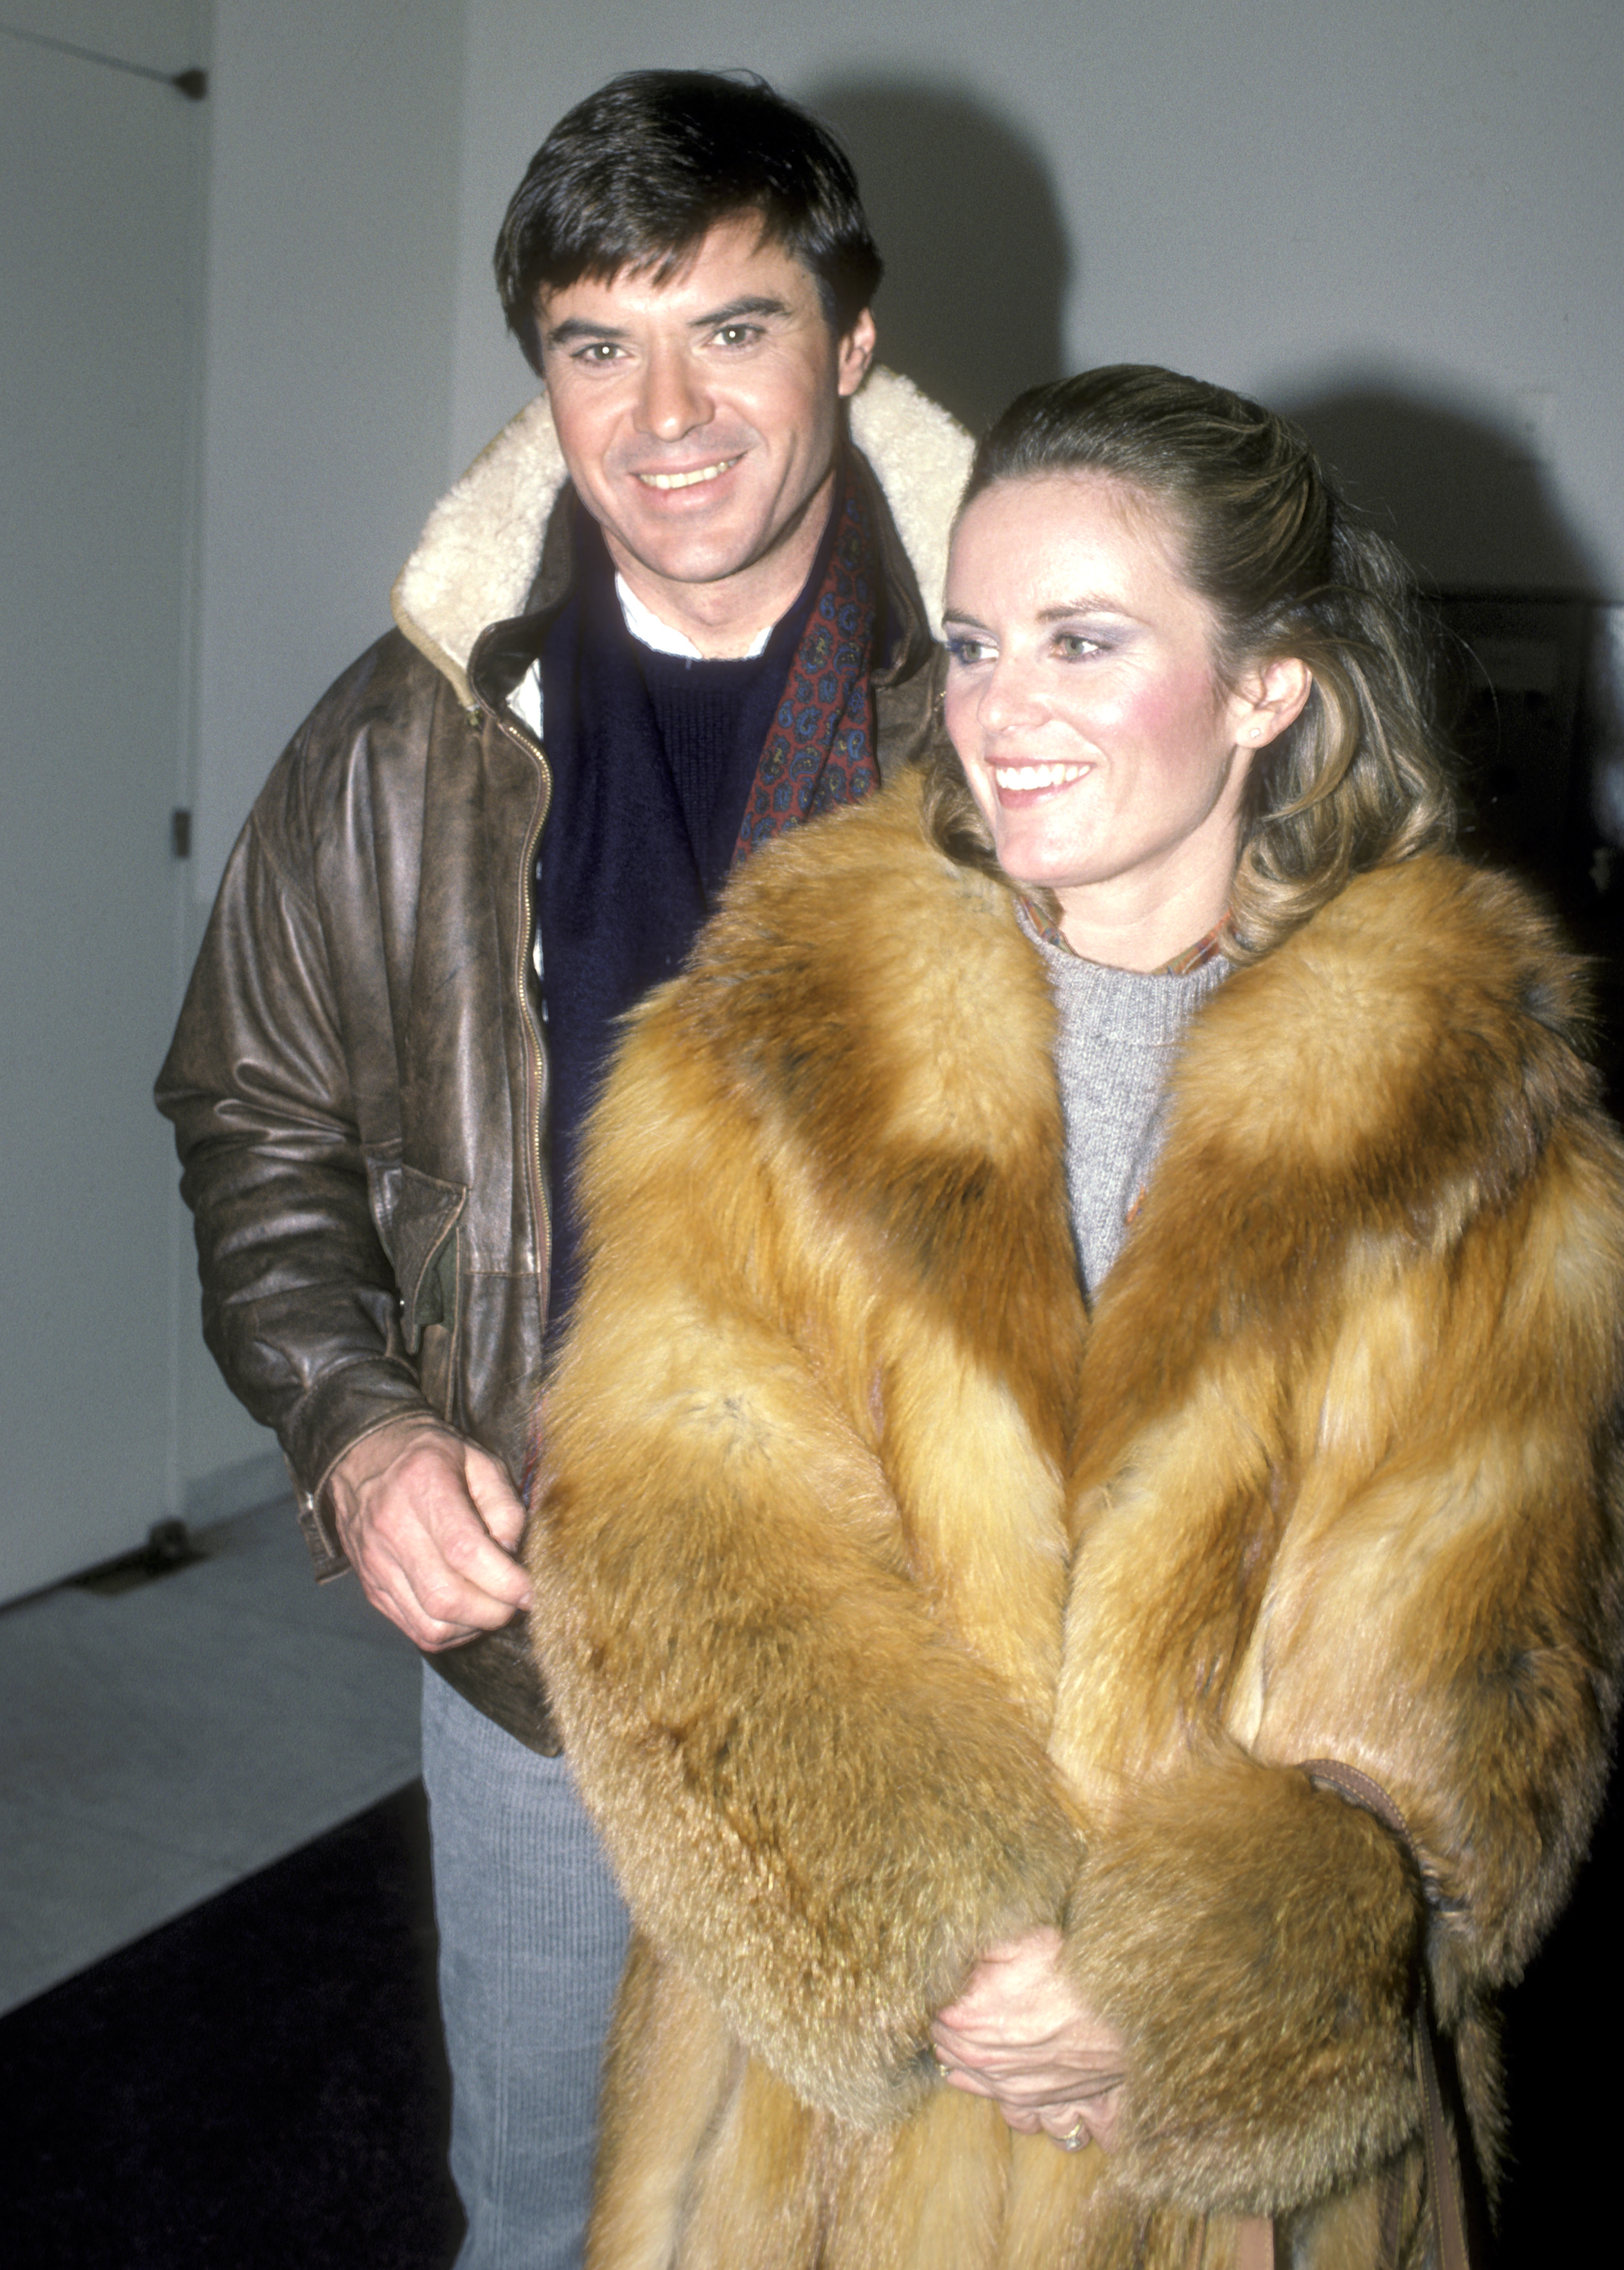 Robert Urich and Heather Menzies backstage after watching "The Hasty Heart" at The Kennedy Center in Washington, DC. on January 12, 1984 | Source: Getty Images